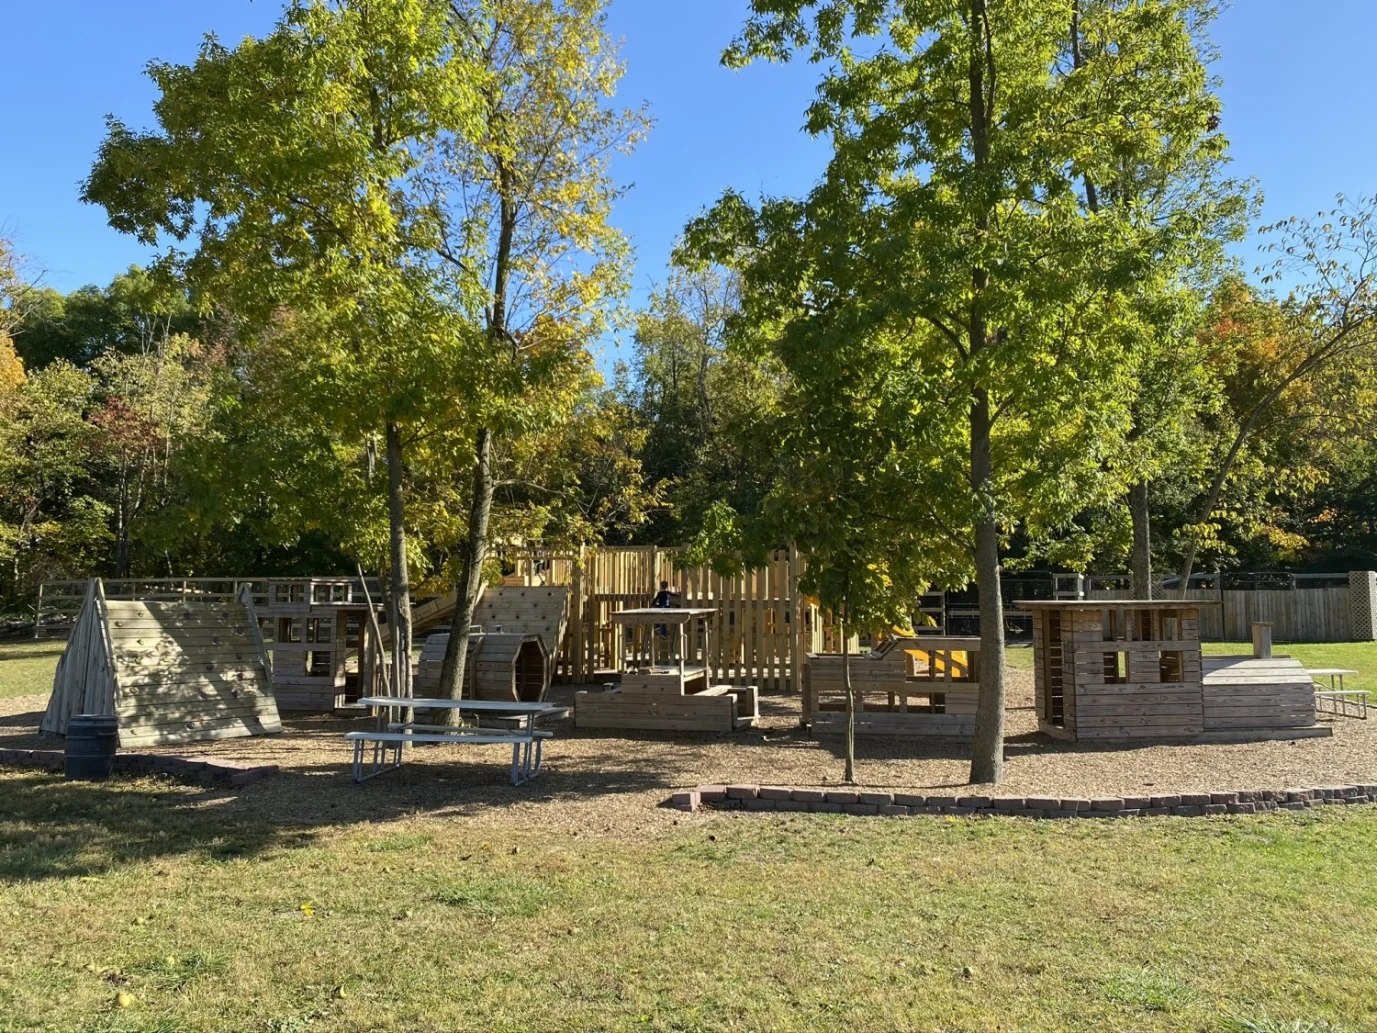 wooden playground structures at Olentangy Indian Caverns